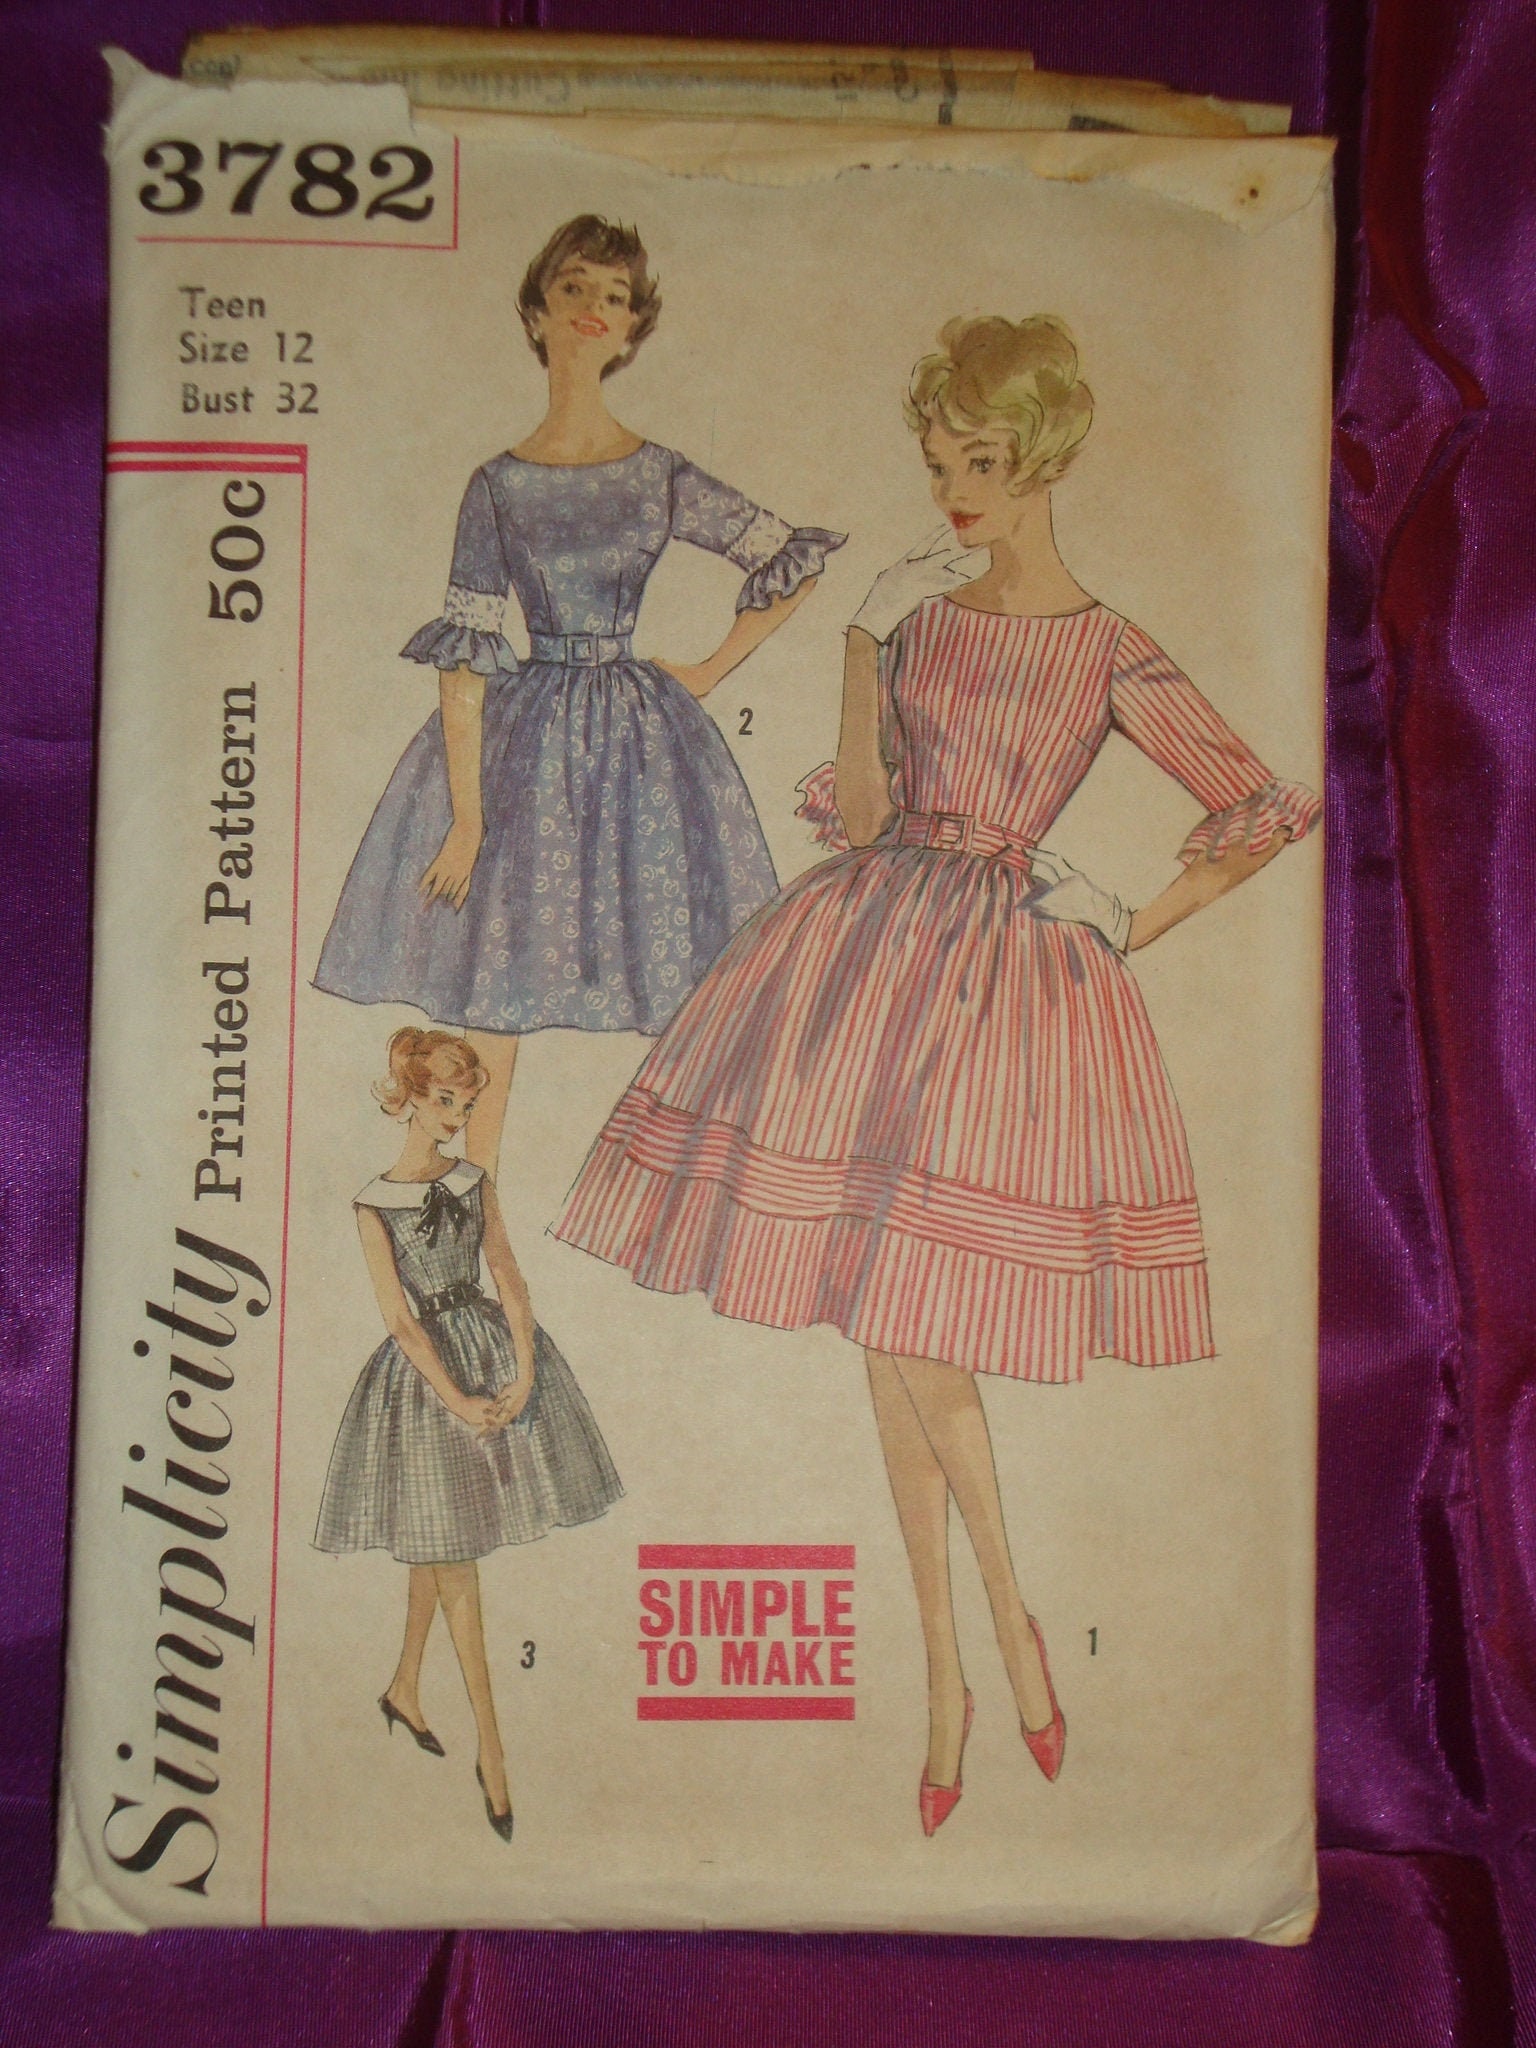 60s EaSY Dress Low Round Neck Opt Collar Full Skirt w Opt Band Slvls n Elbow Length Sleeves w Ruffle CMPLT Simplicity 3782 Bust US 32 CM 81